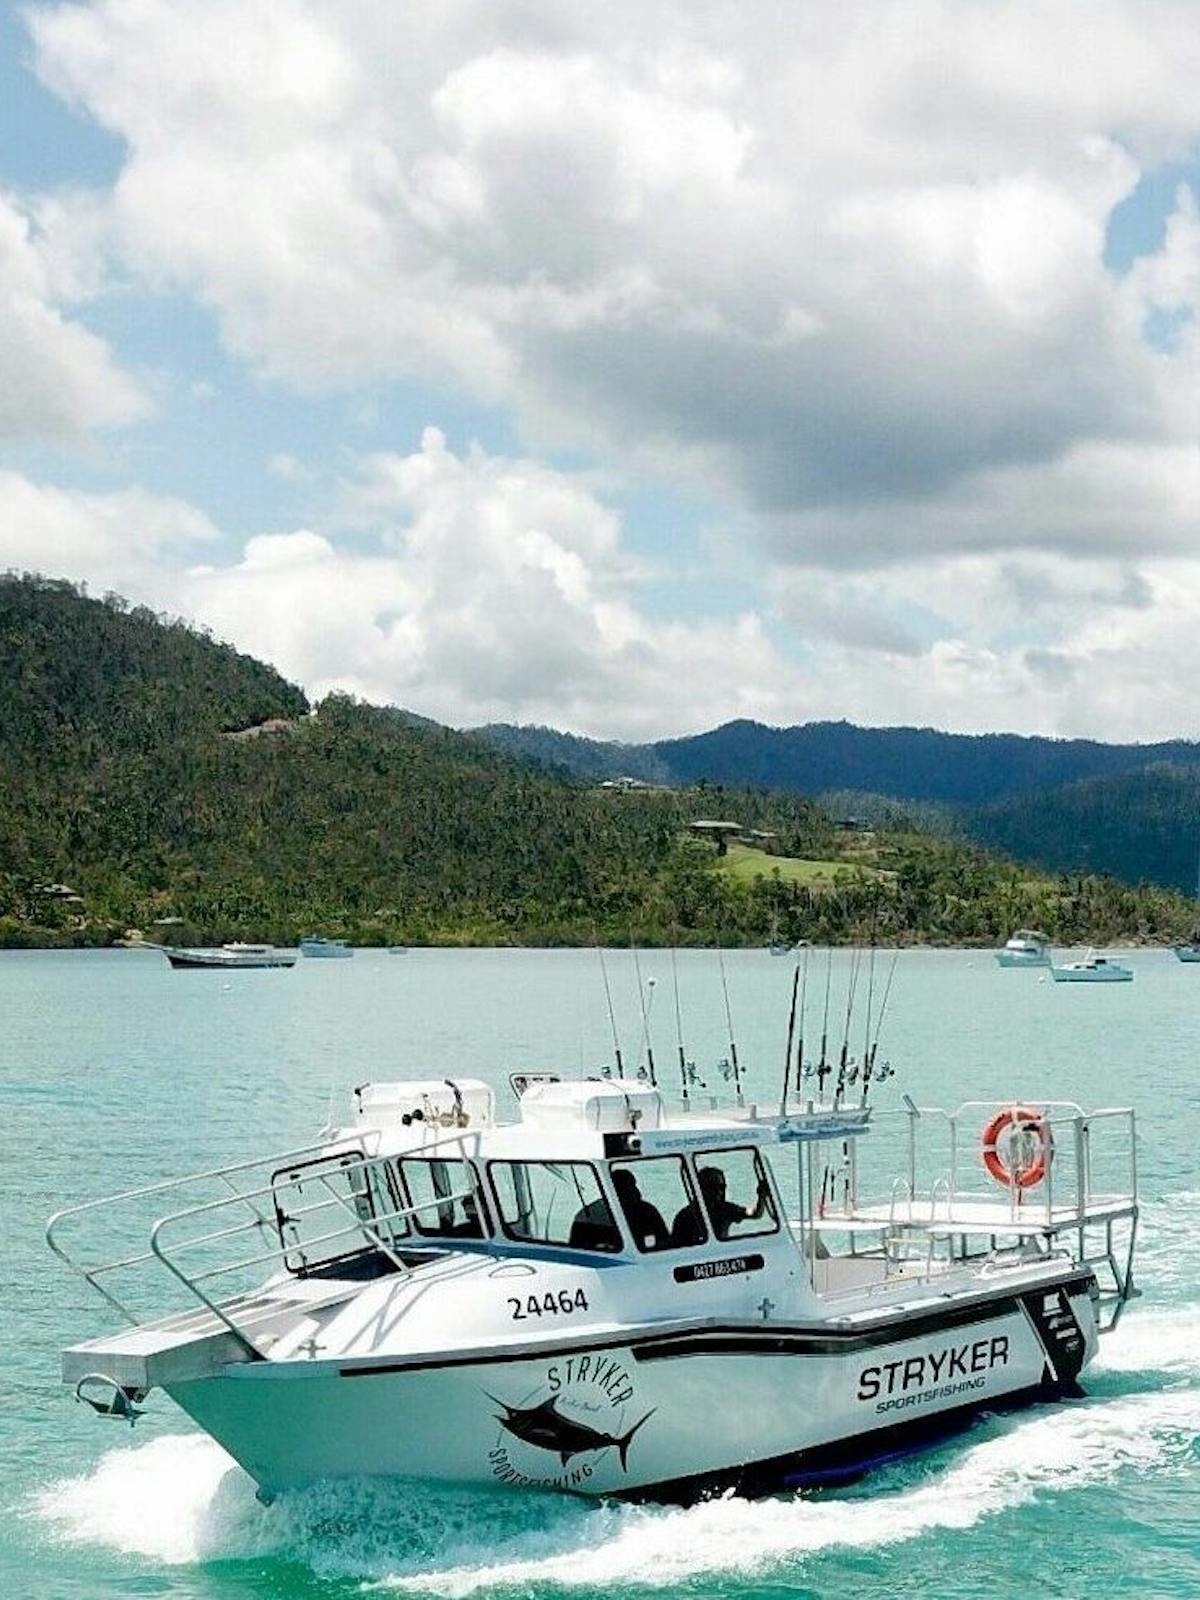 airlie beach fishing charters' boat, stryker, in airlie beach, queensland